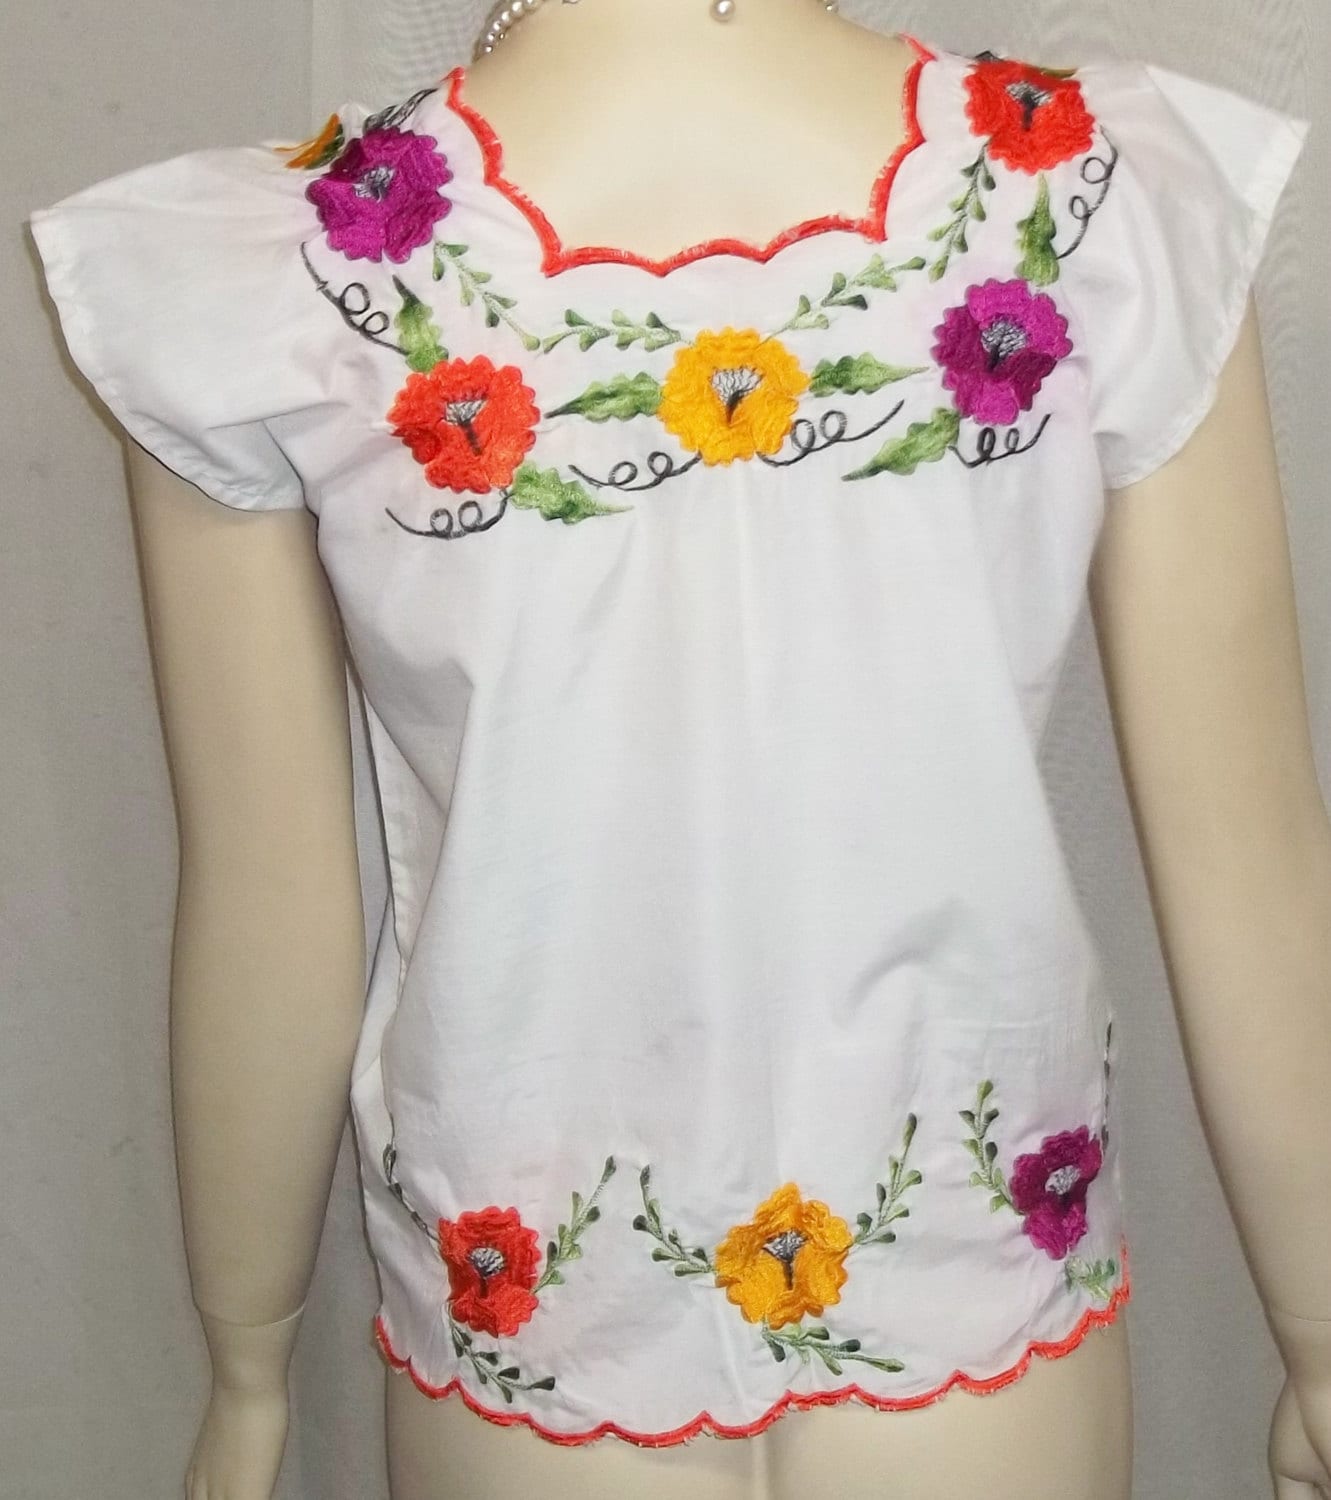 Vintage BOHO Mexican Embroidered Floral Blouse Small Medium - Etsy